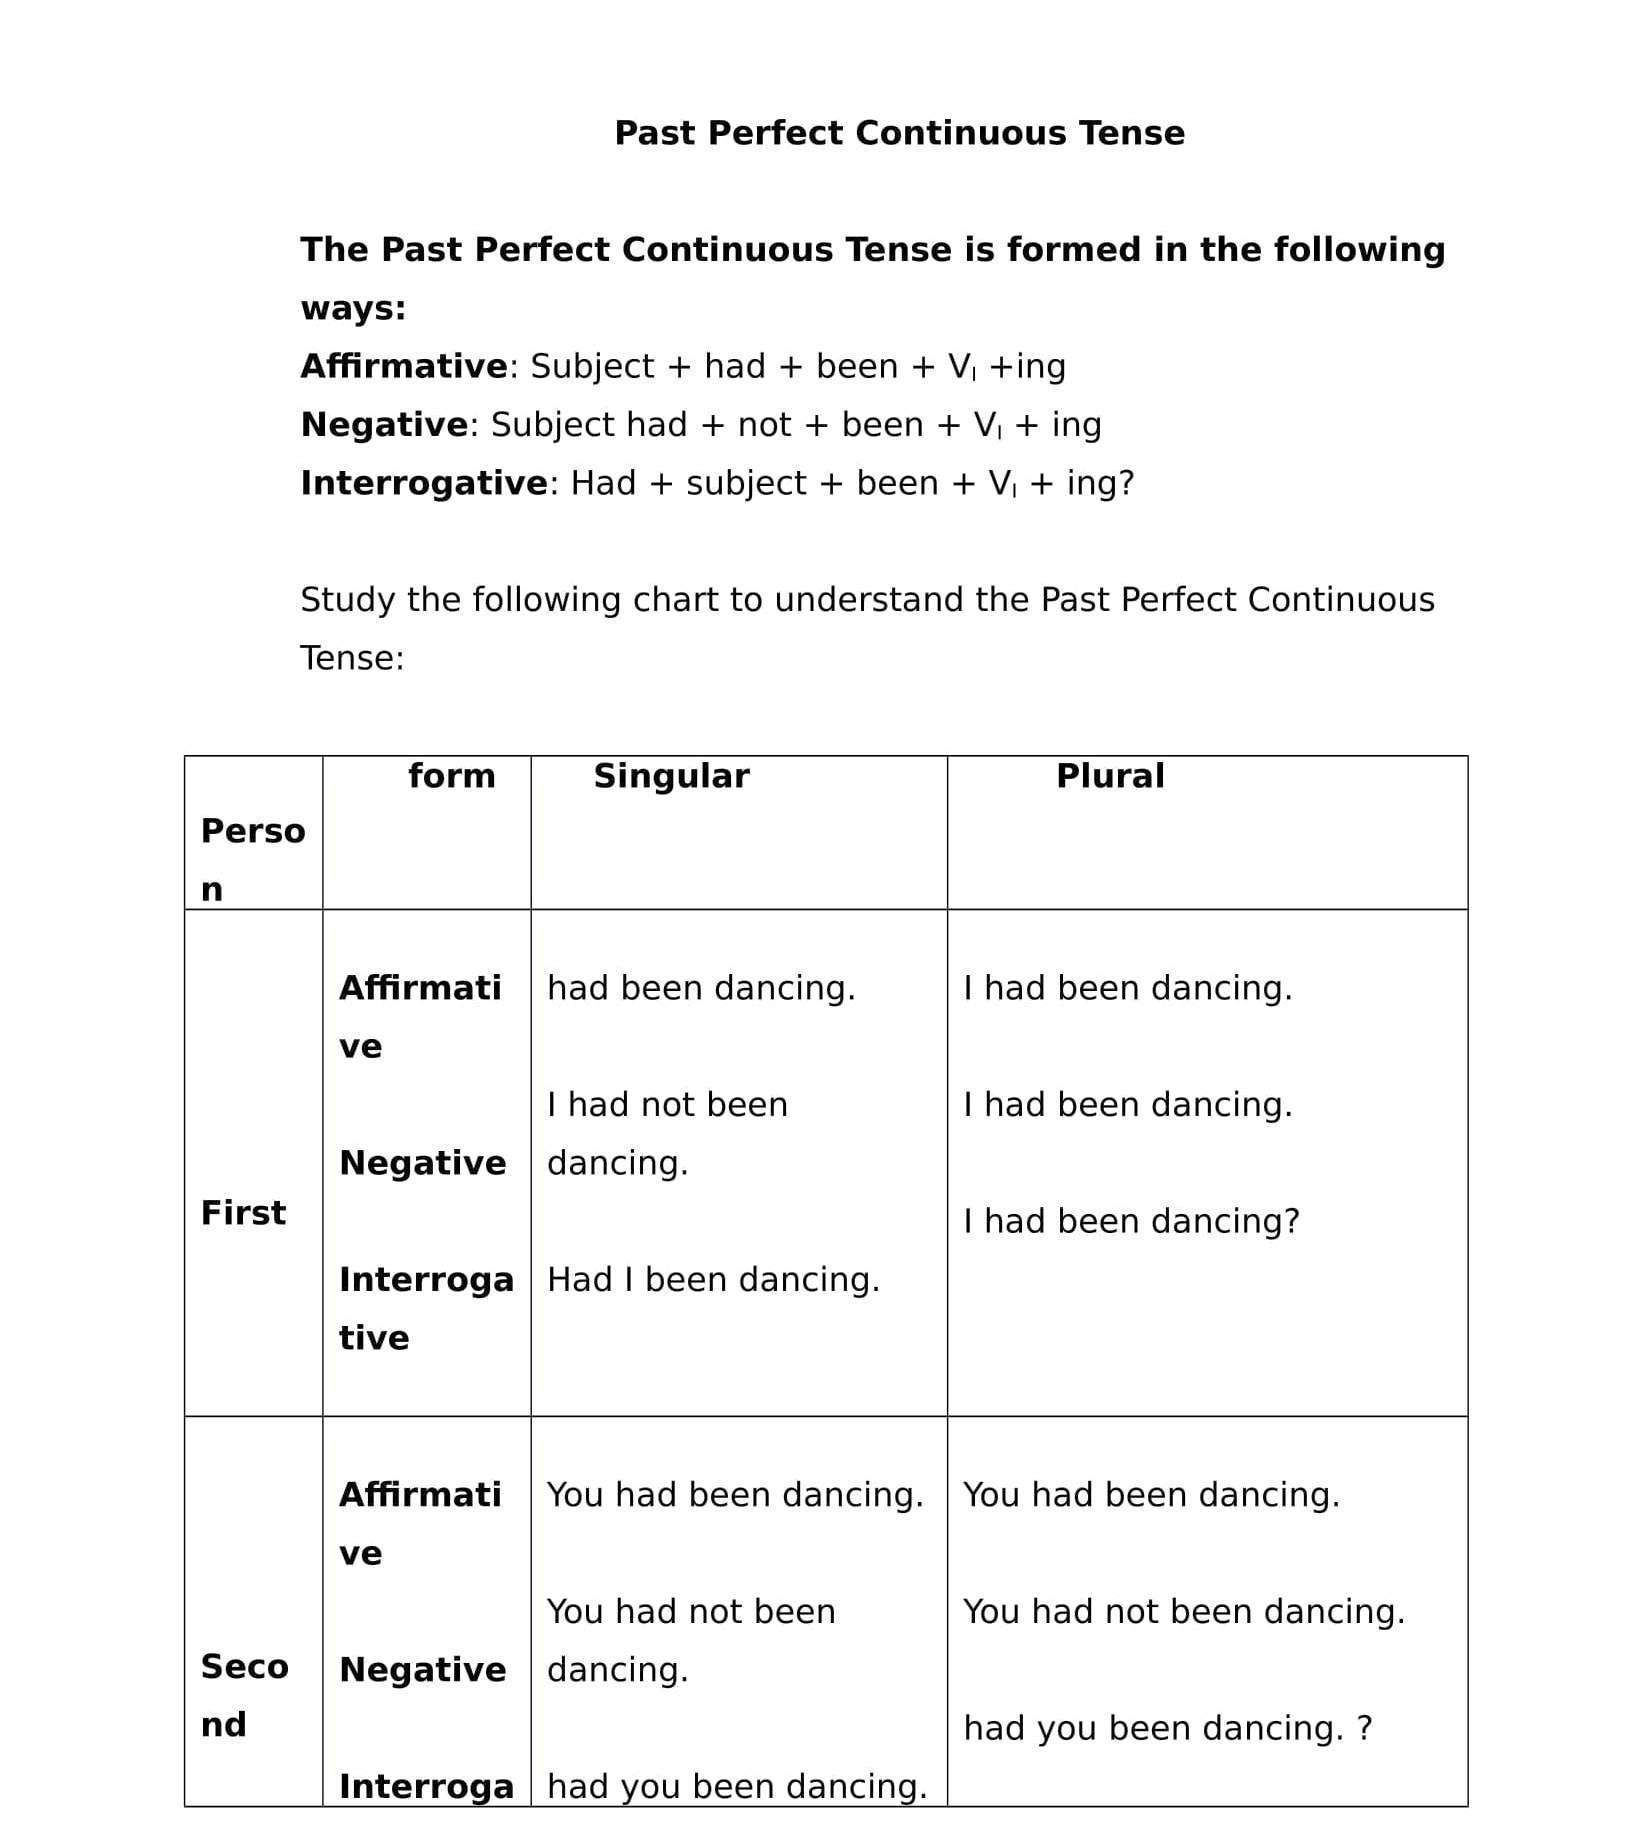 Rules of Past Perfect Continuous Tense